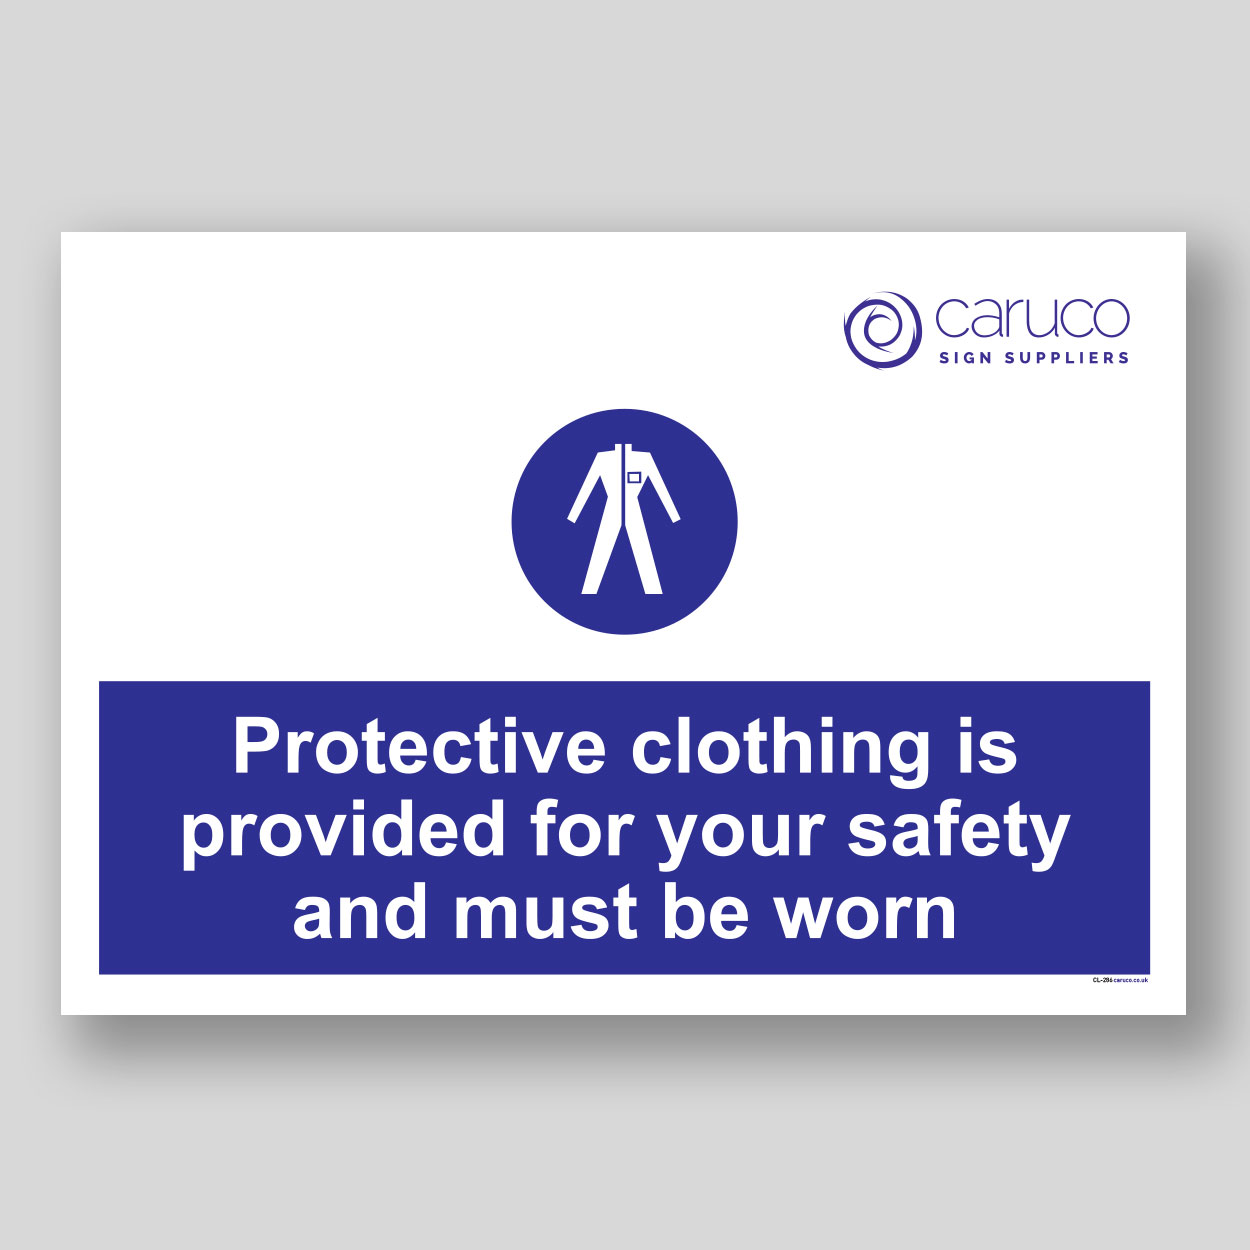 CL-286 Protective clothing is provided